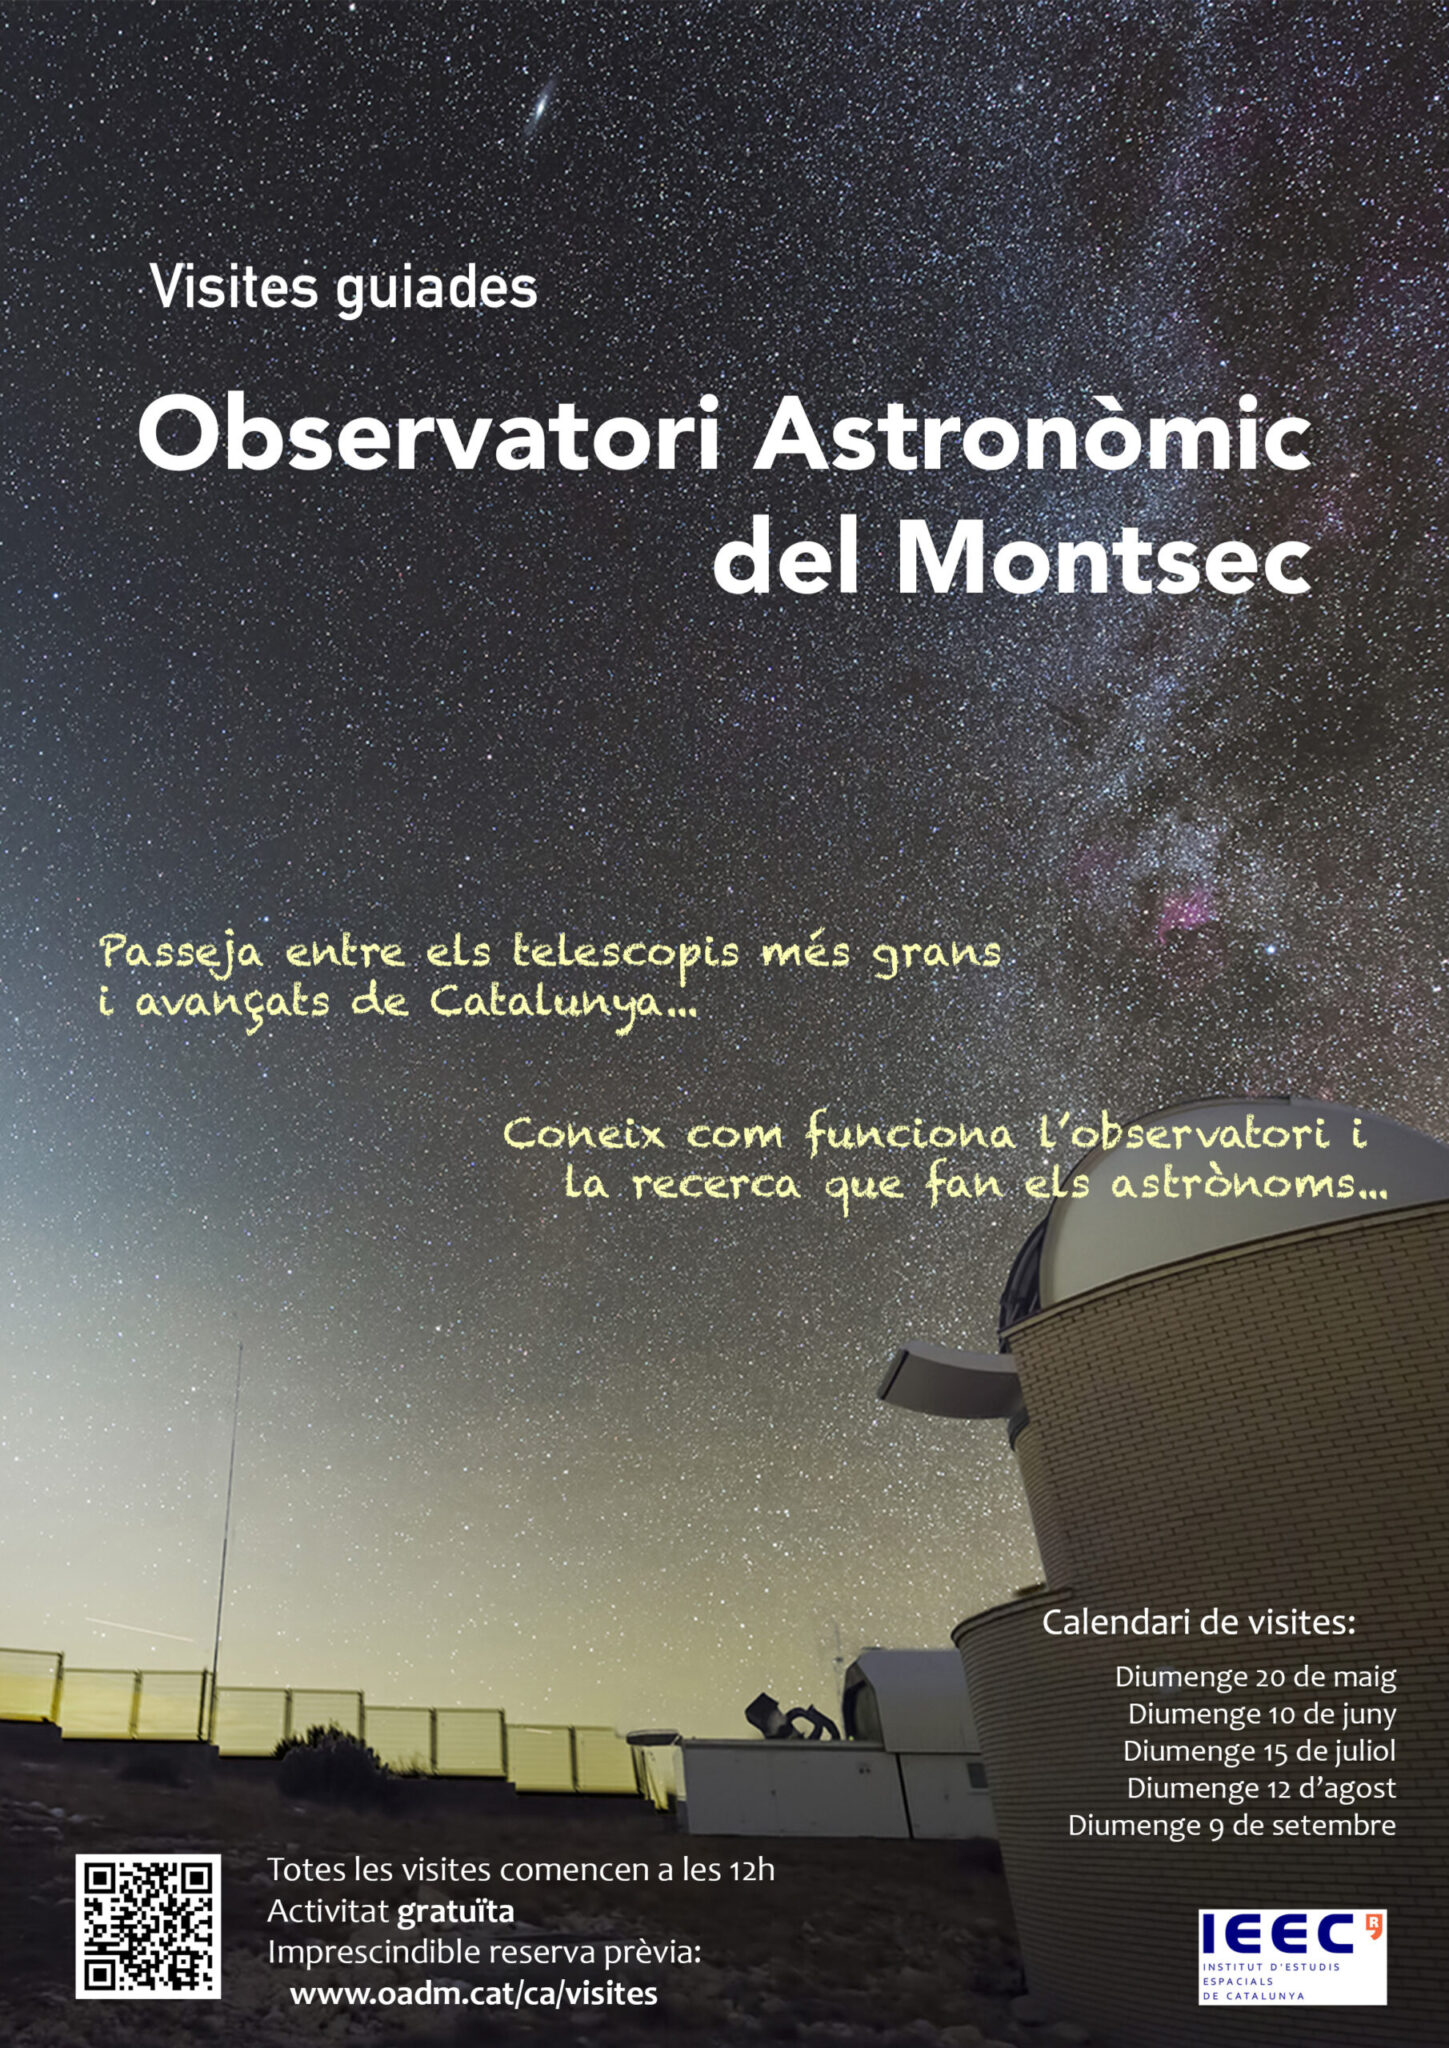 Montsec Observatory opens its doors to the public